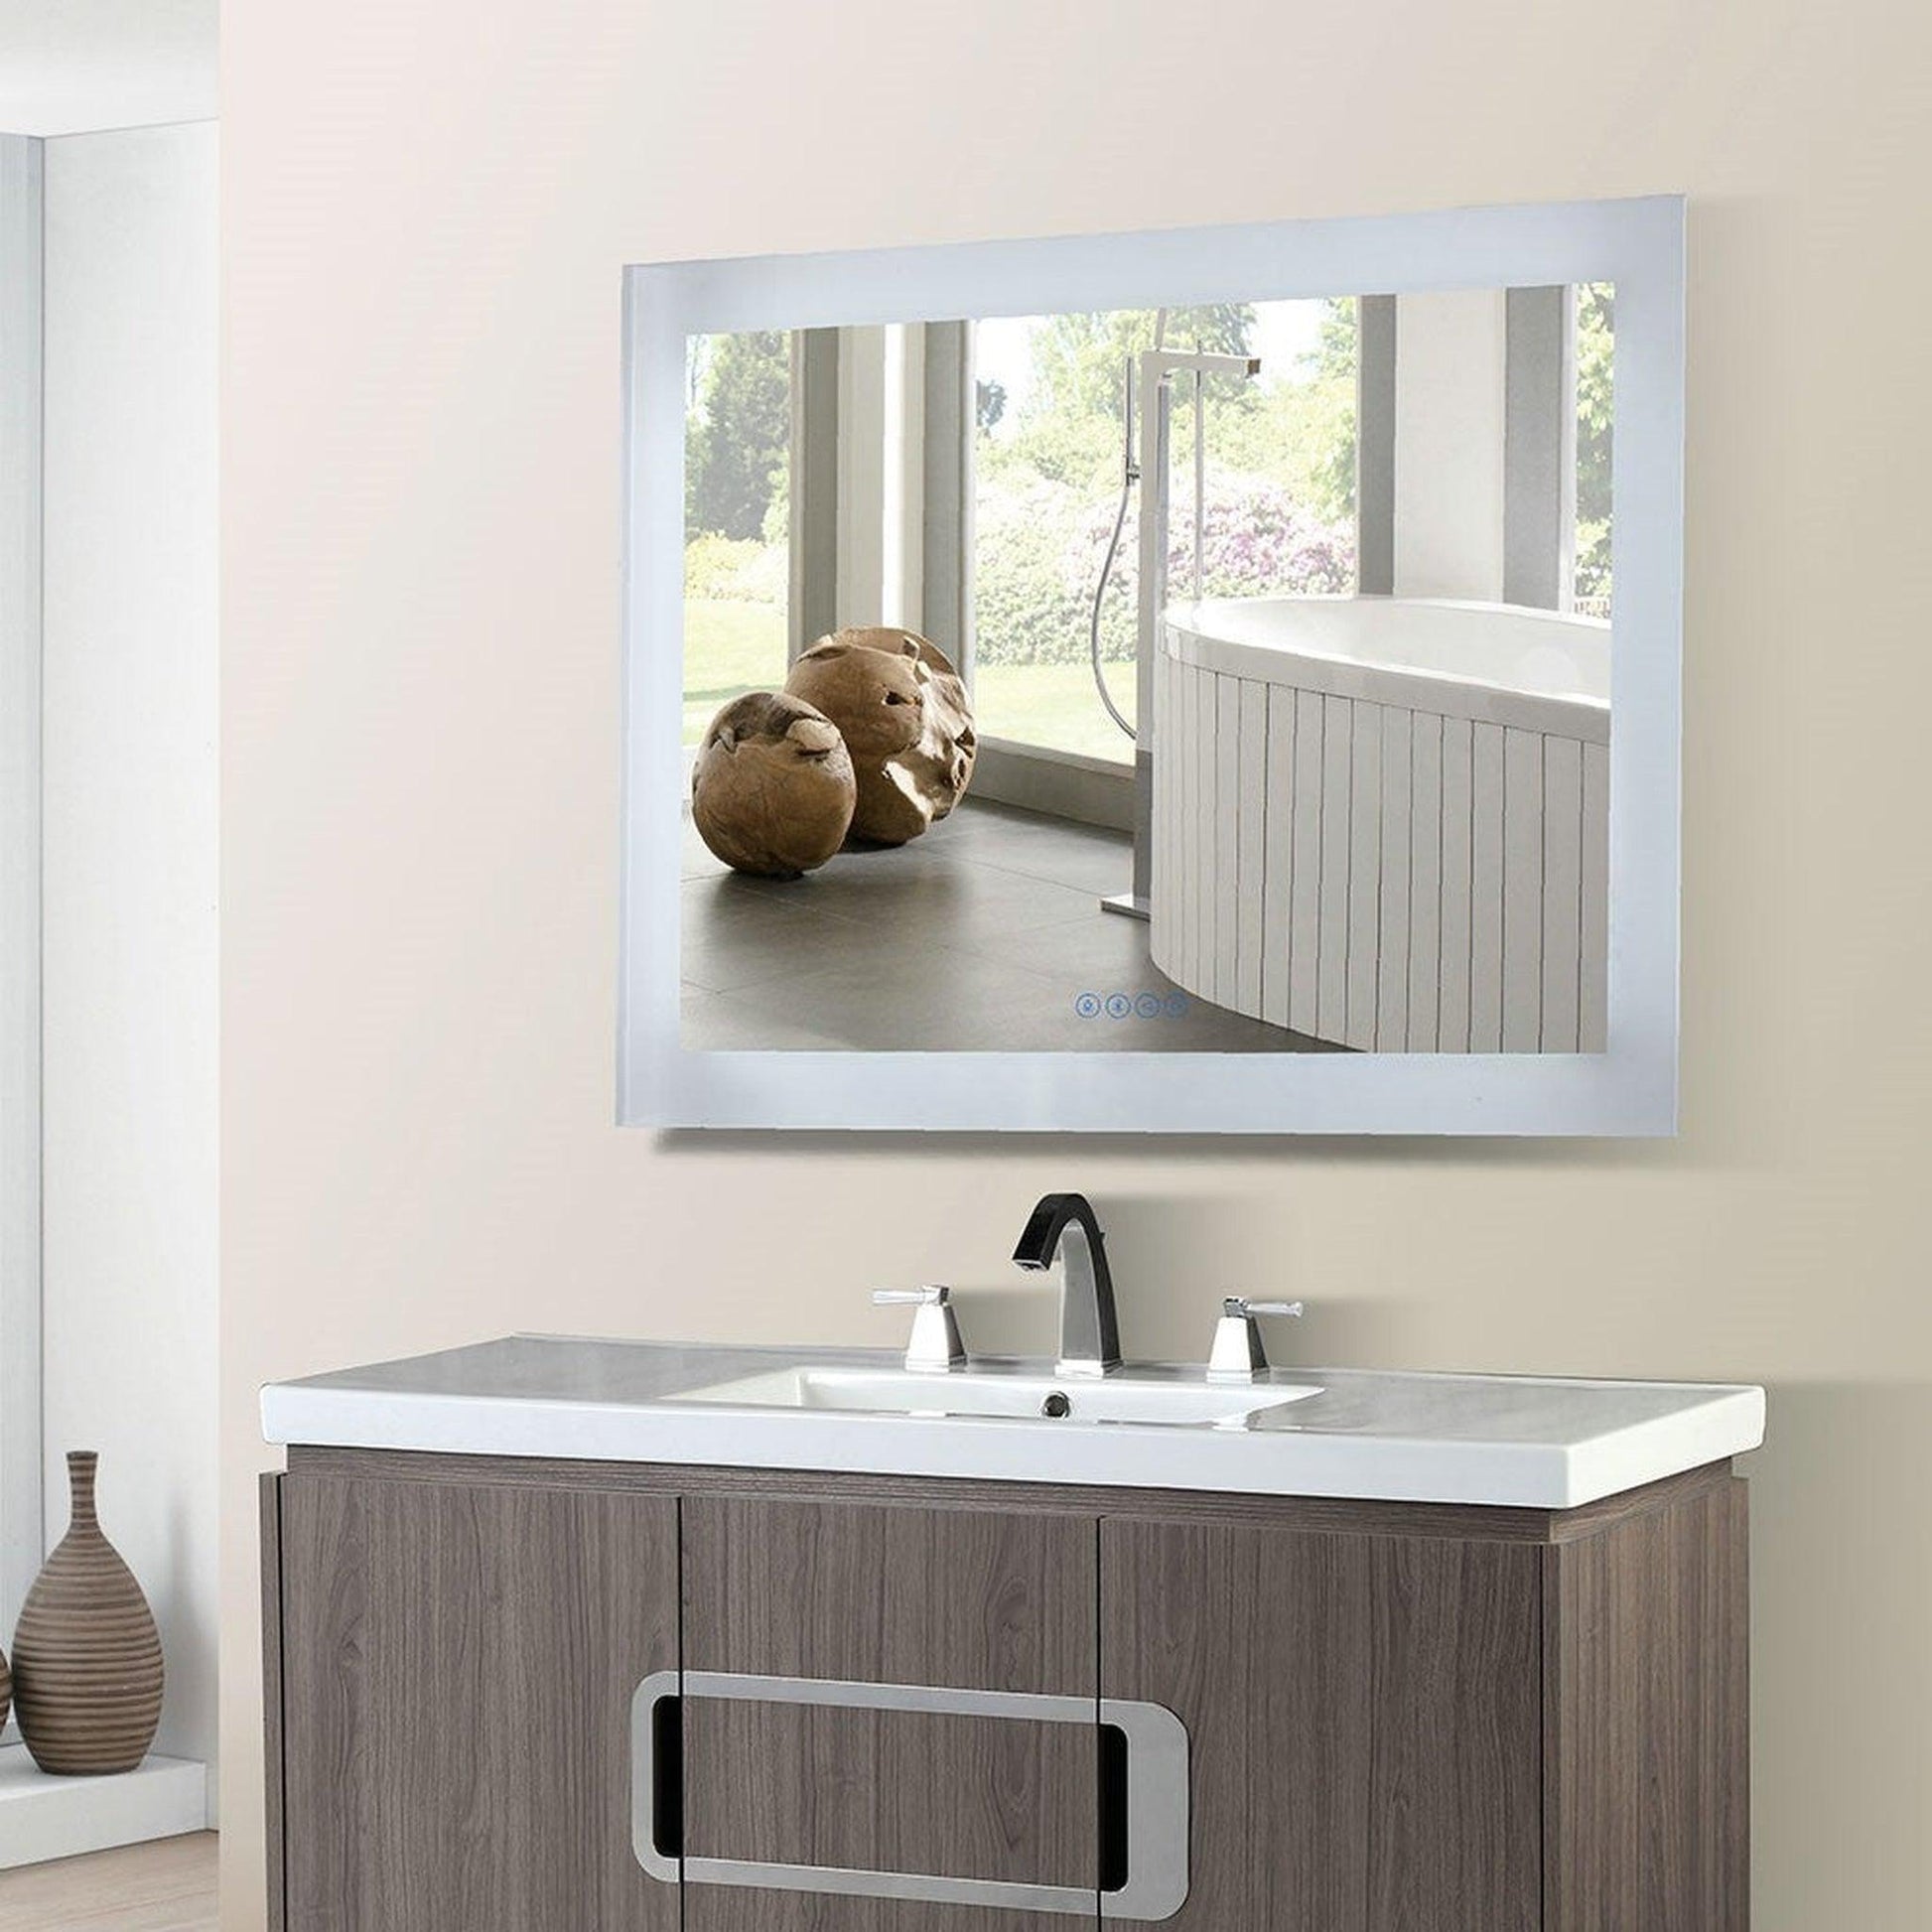 Bellaterra Home 36" x 27" Rectangle Wall-Mounted LED Bordered Illuminated Frameless Mirror With Built-in Bluetooth Speaker